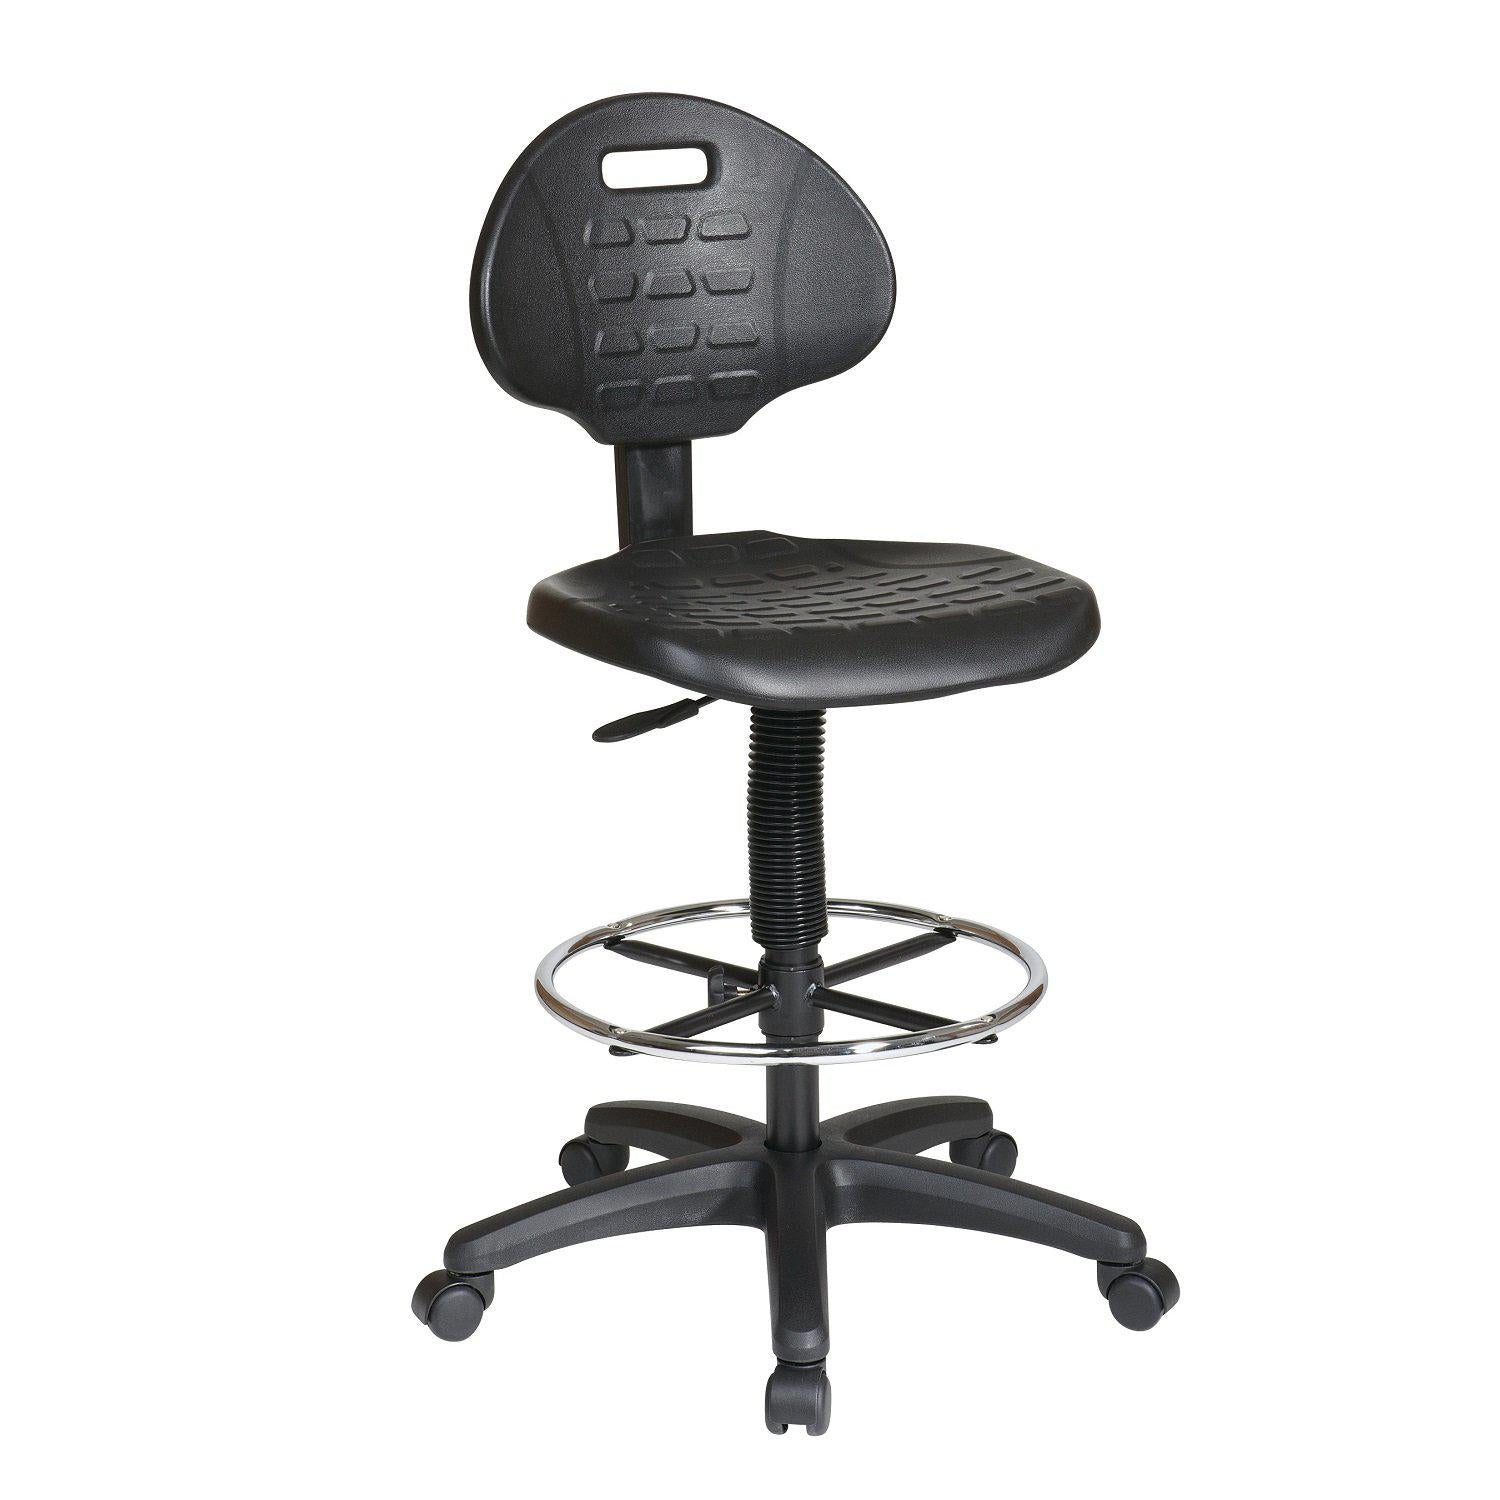 Intermediate Drafting Chair with Adjustable Footrest